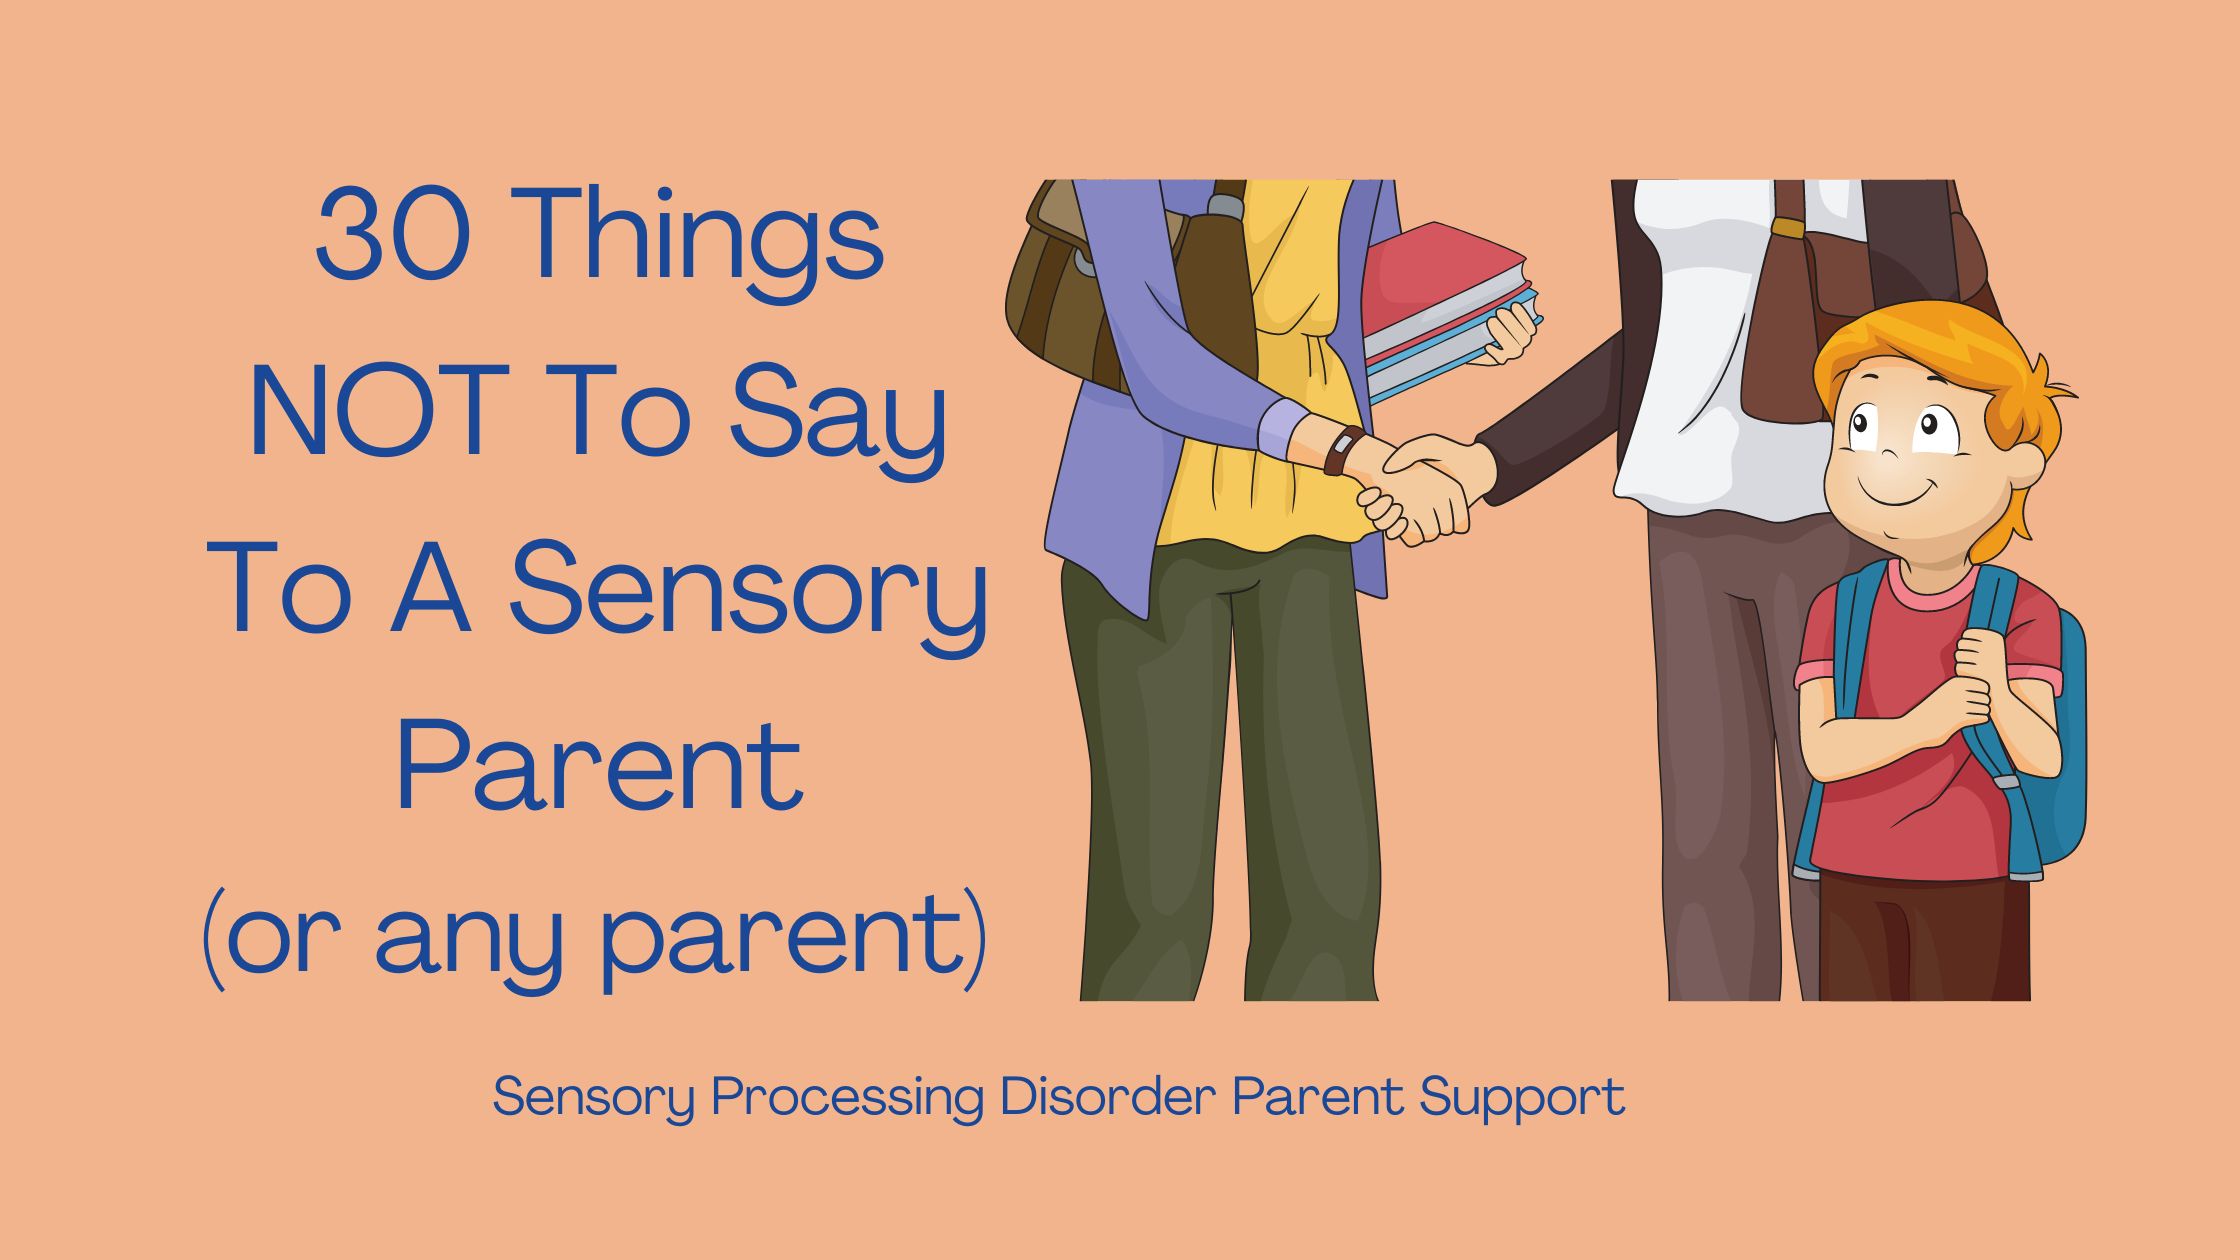 parent of a child who has sensory processing disorder talking to another parent 30 Things NOT To Say To A Sensory Parent  (or any parent)